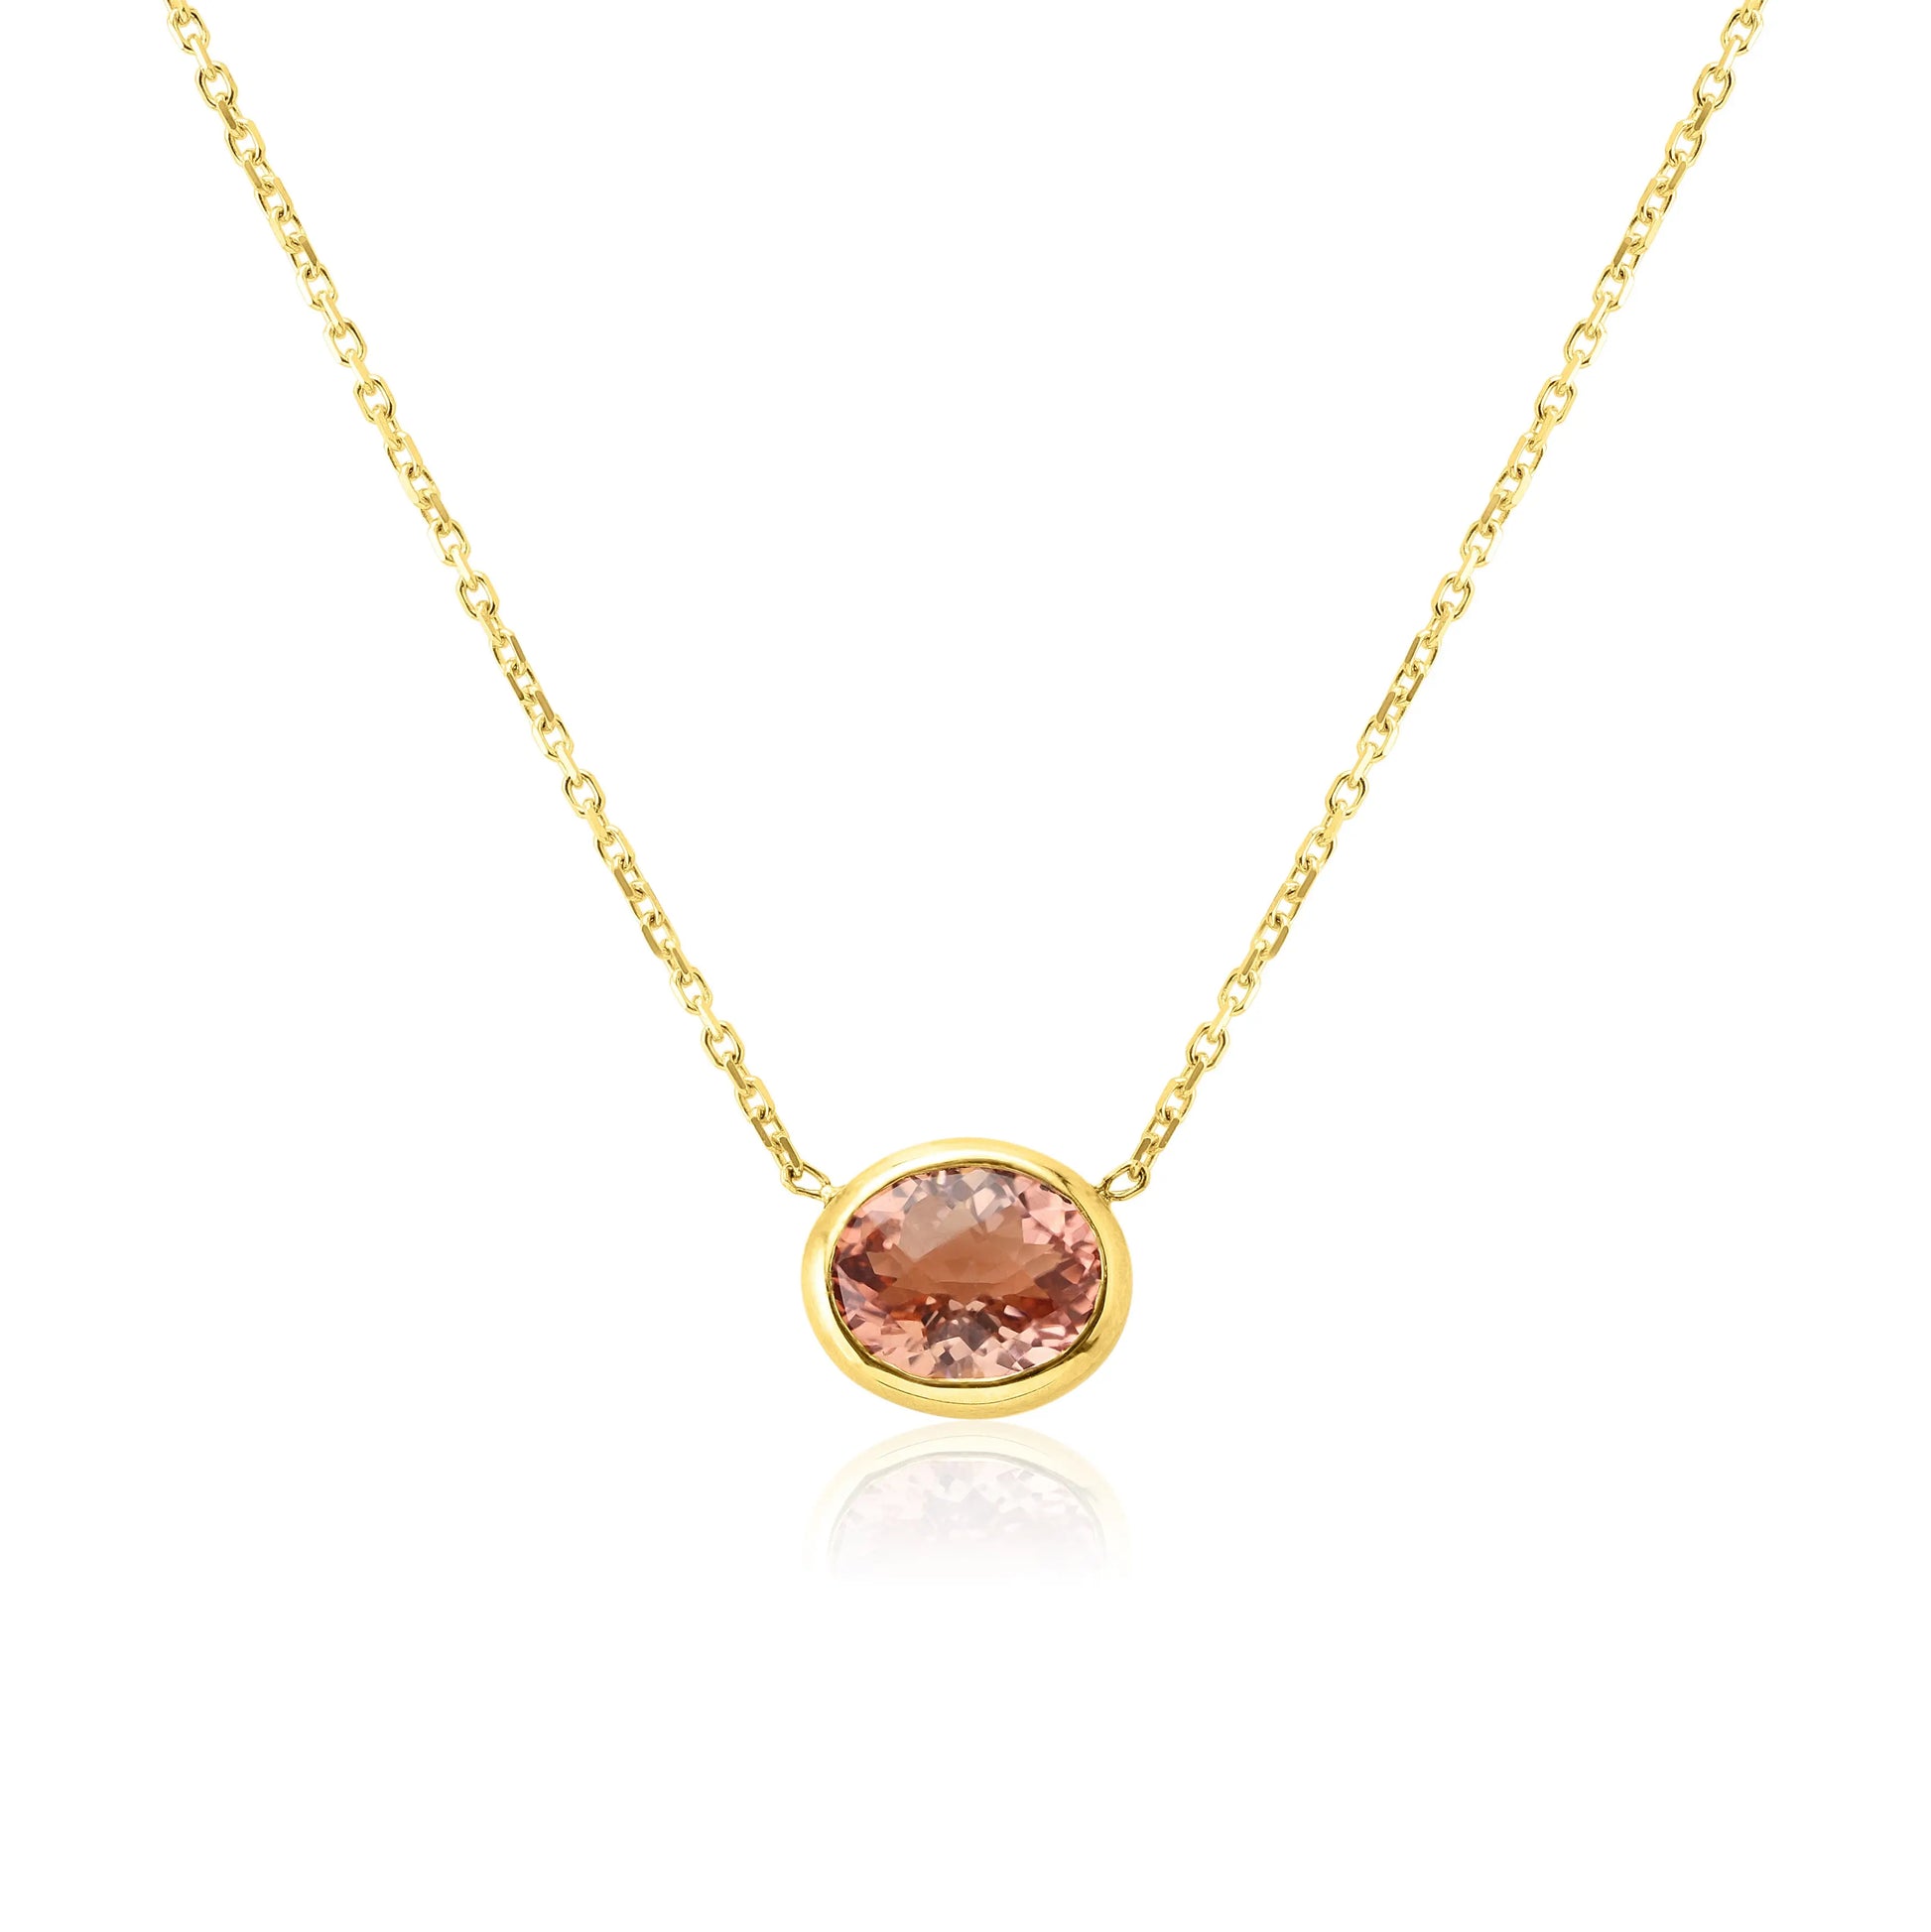 Yellow Gold Necklace 14k Yellow Gold Oval Checkerboard Cut Pink Tourmaline Necklace dansonjewelers Danson Jewelers 